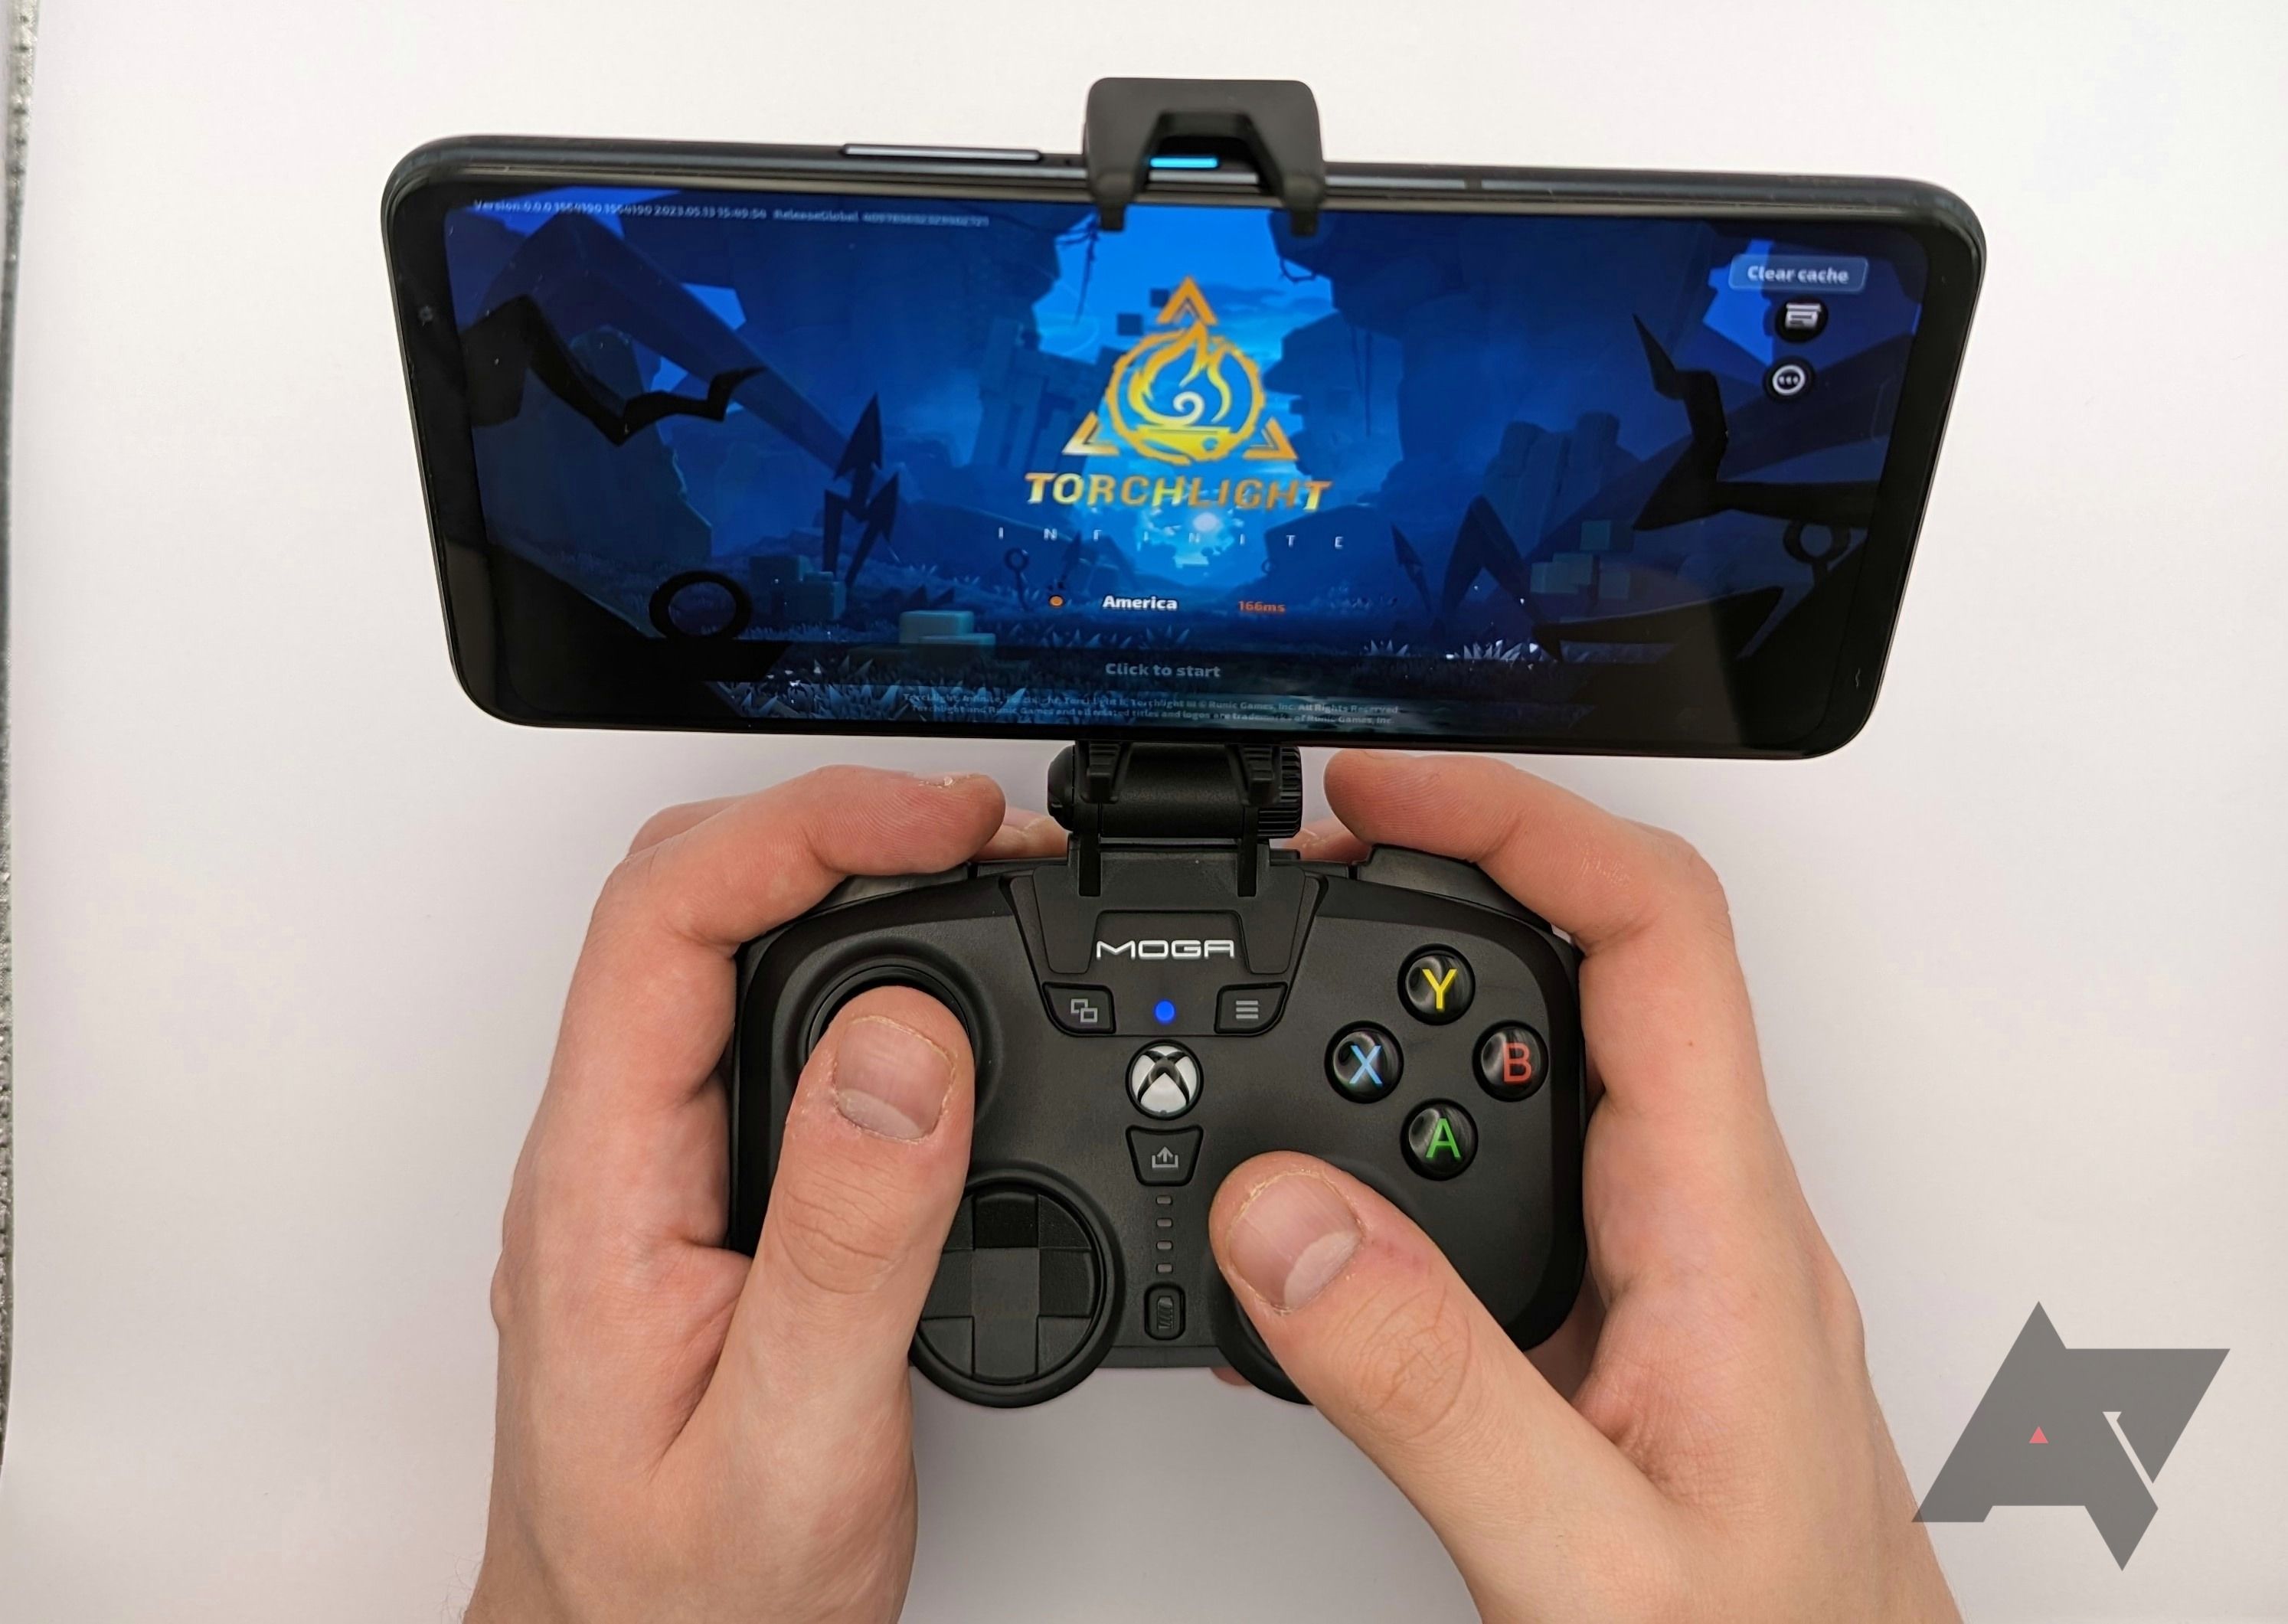 hands holding game controller with attached phone